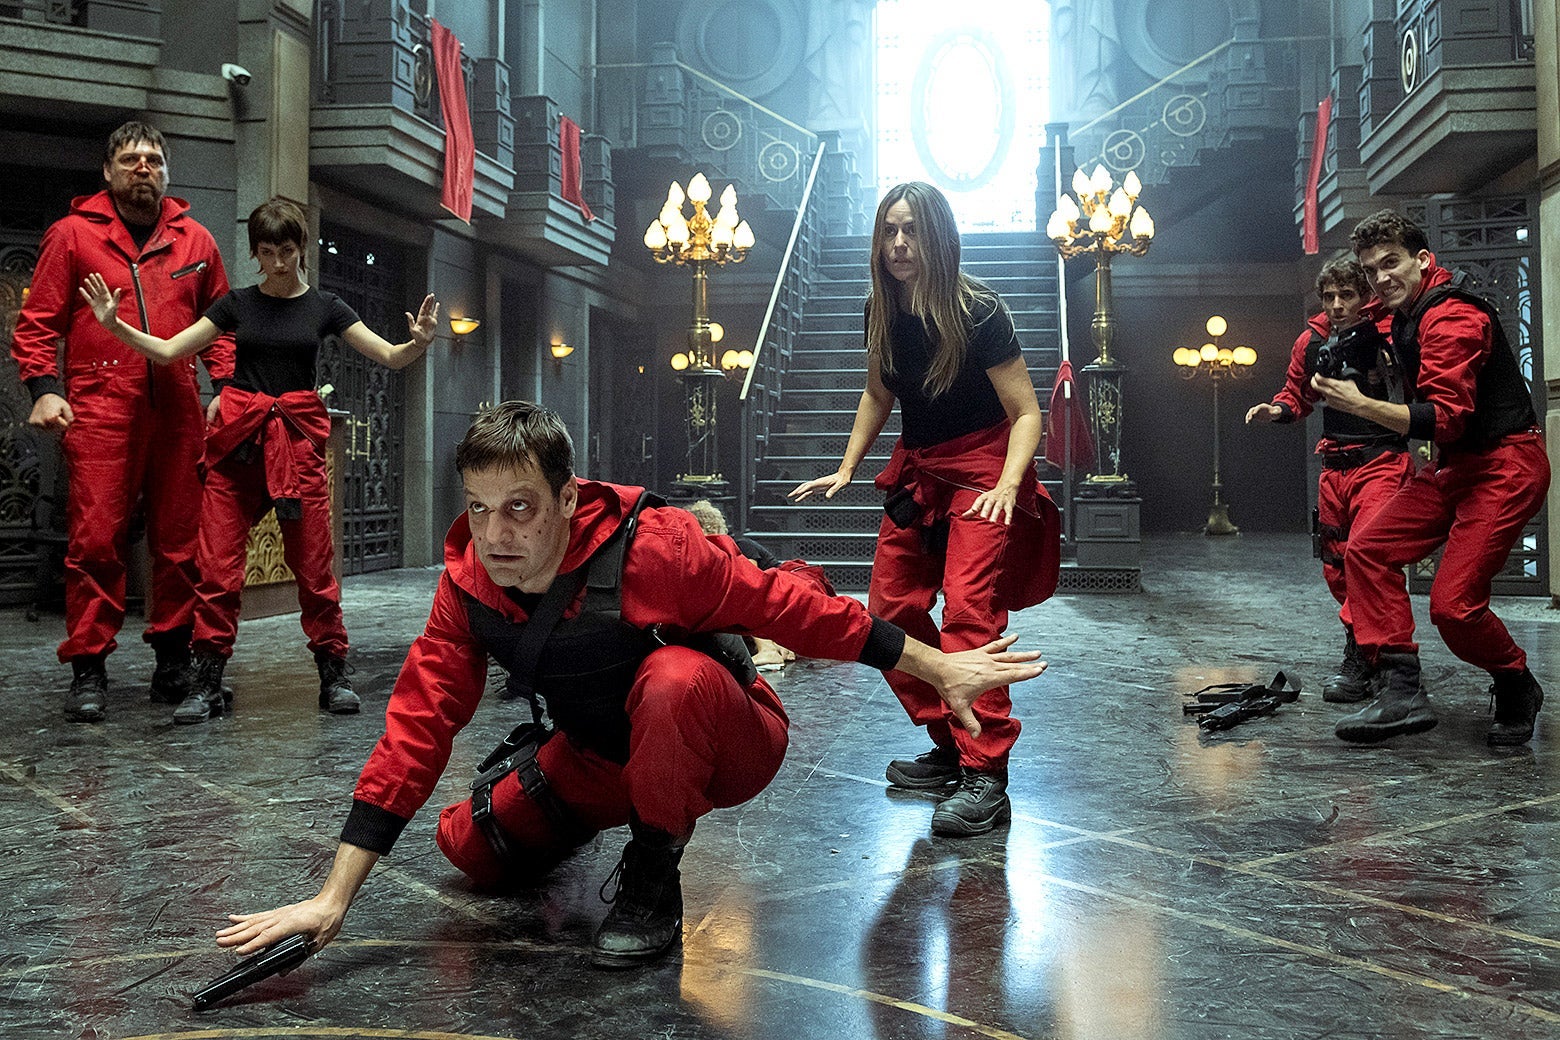 Five thieves in red jumpsuits spread out across the inside of a bank.